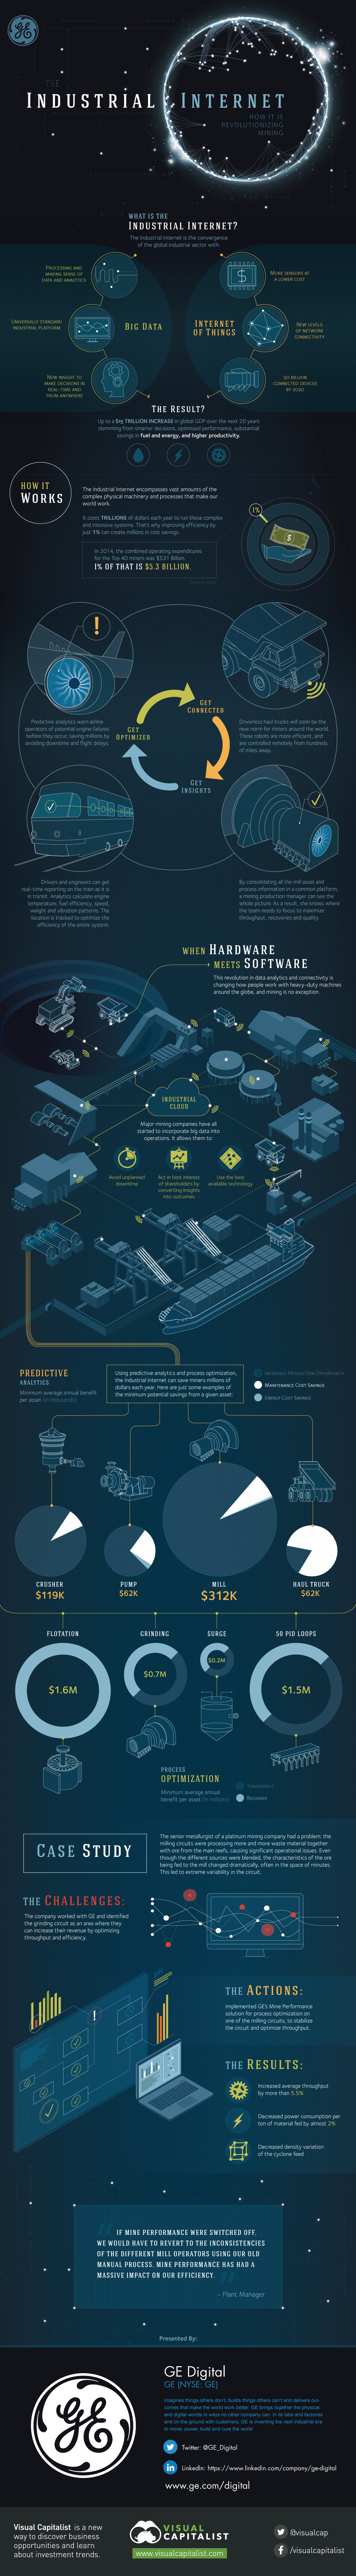 ge-industrial-internet-infographic